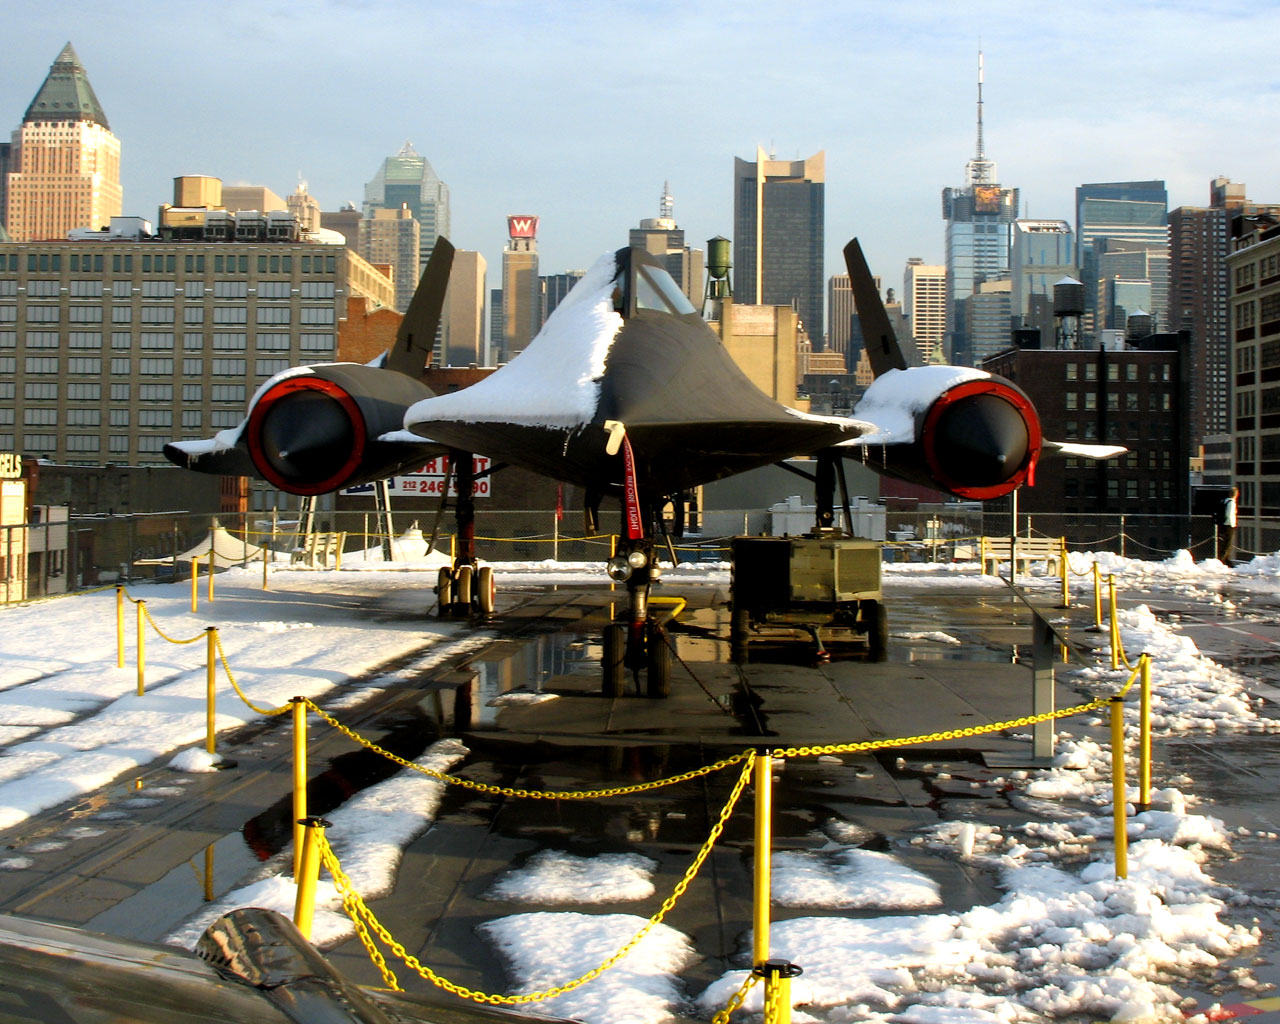 SR-71 on the Deck of the Intrepid